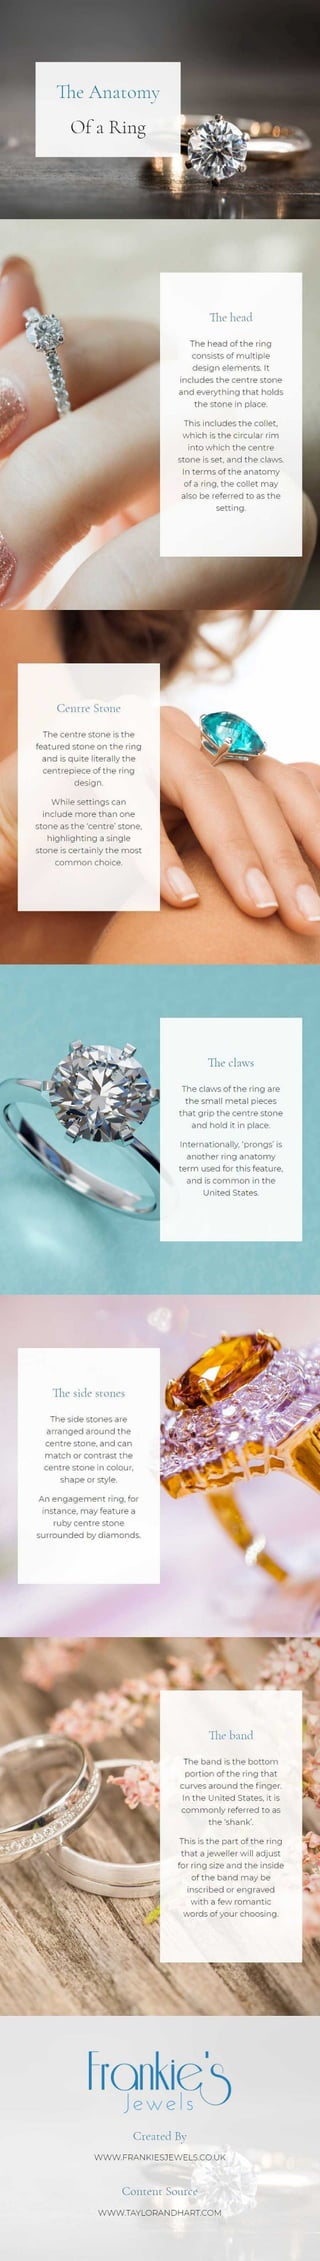 The anatomy of a ring